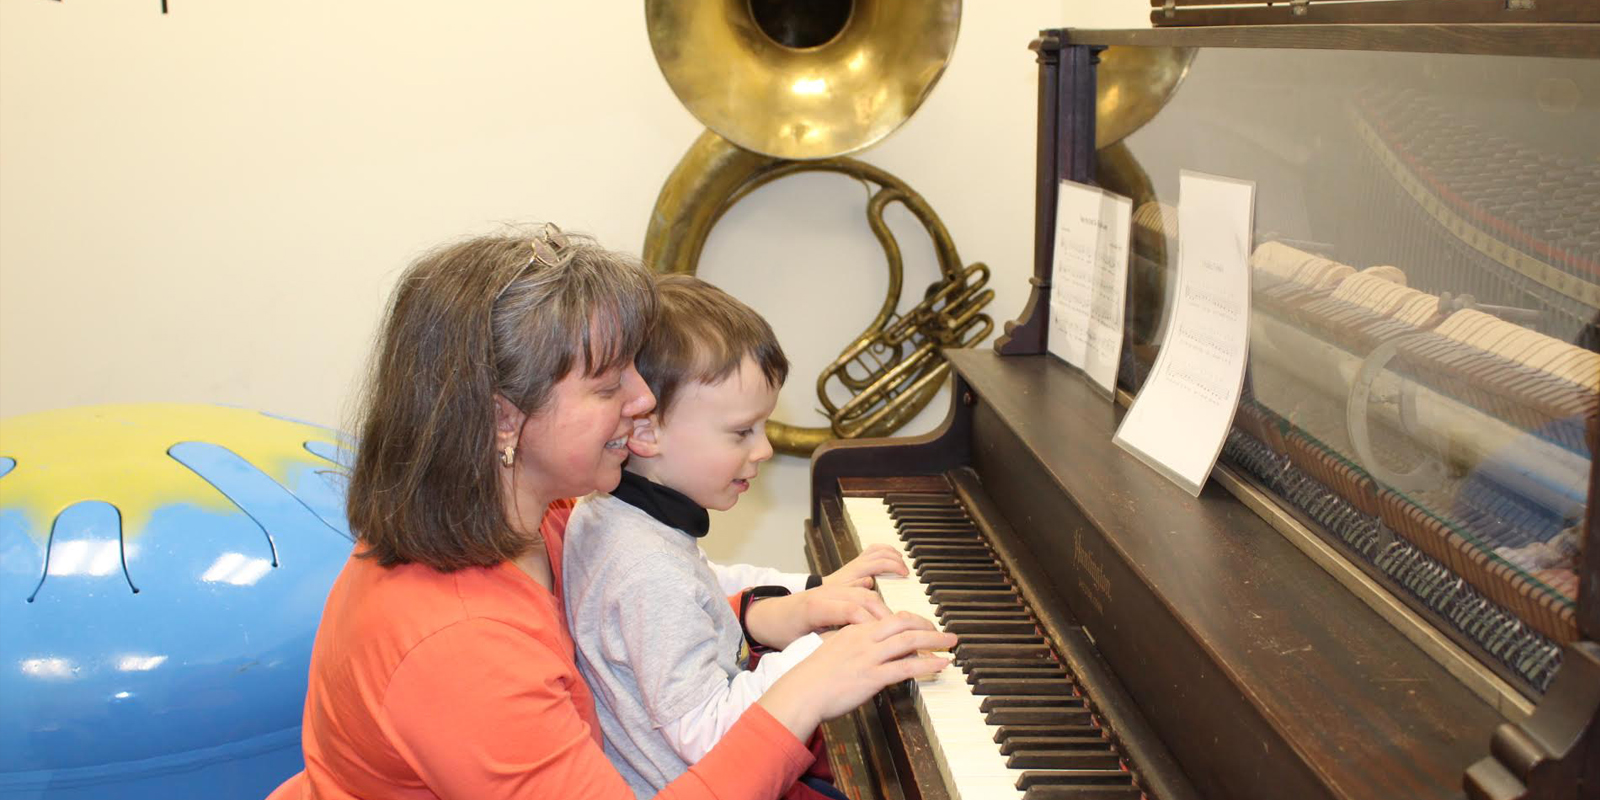 Woman with light brown hair wearing orange shirt is helping young boy play the piano